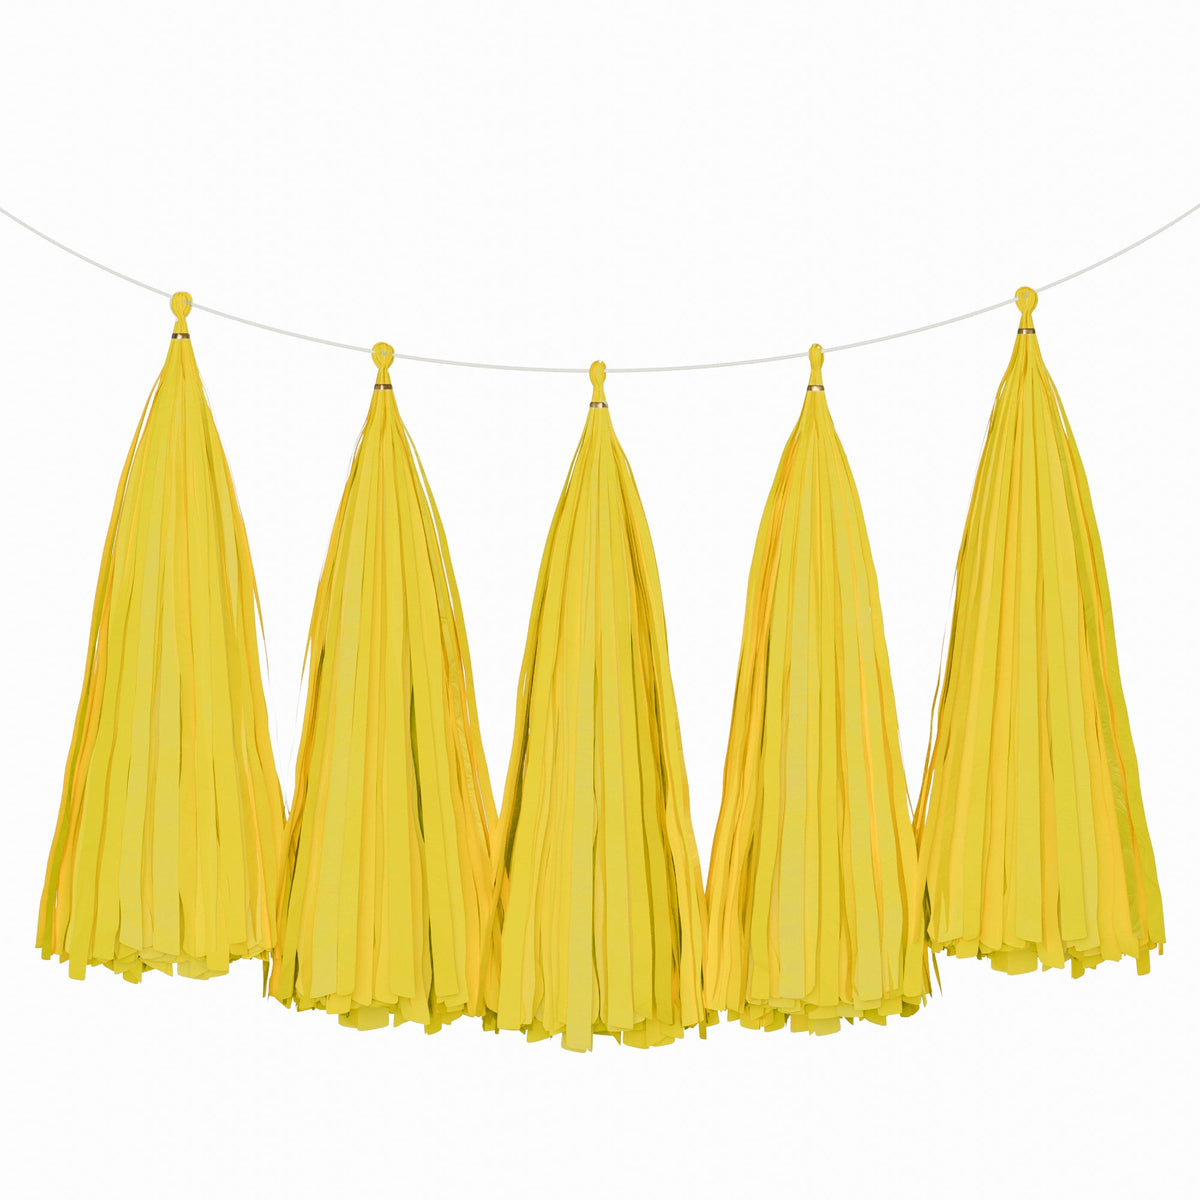 Weifang Mayshine Imp&exp co Decorations Yellow Tassel Garland, 5 Count 810064197161